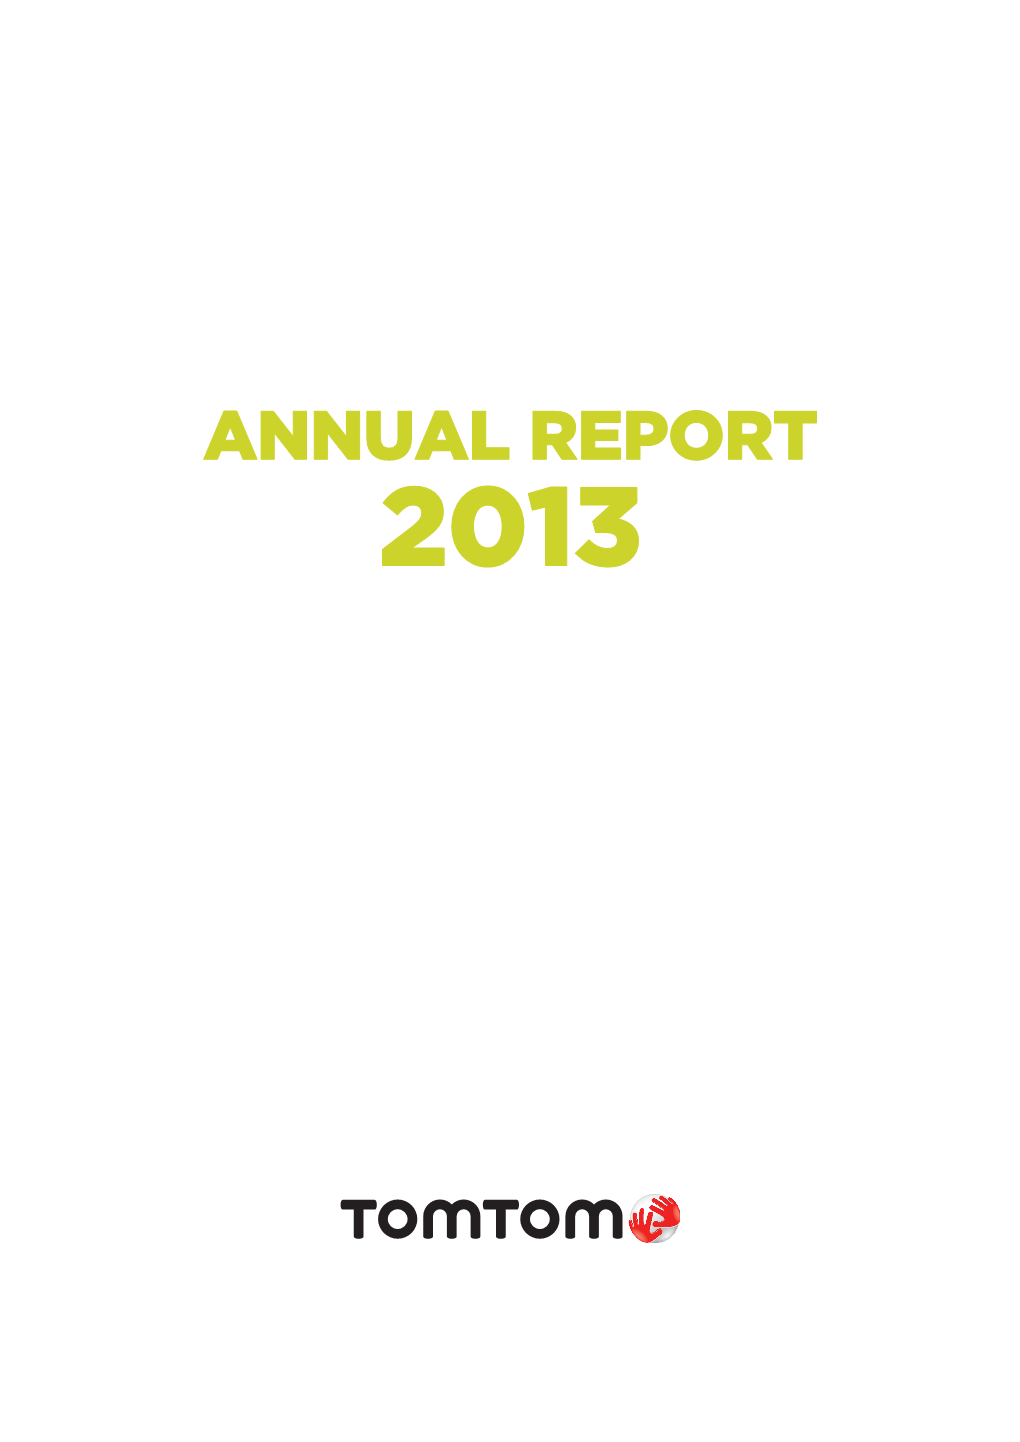 ANNUAL REPORT 2013 Forward-Looking Statements/Important Notice